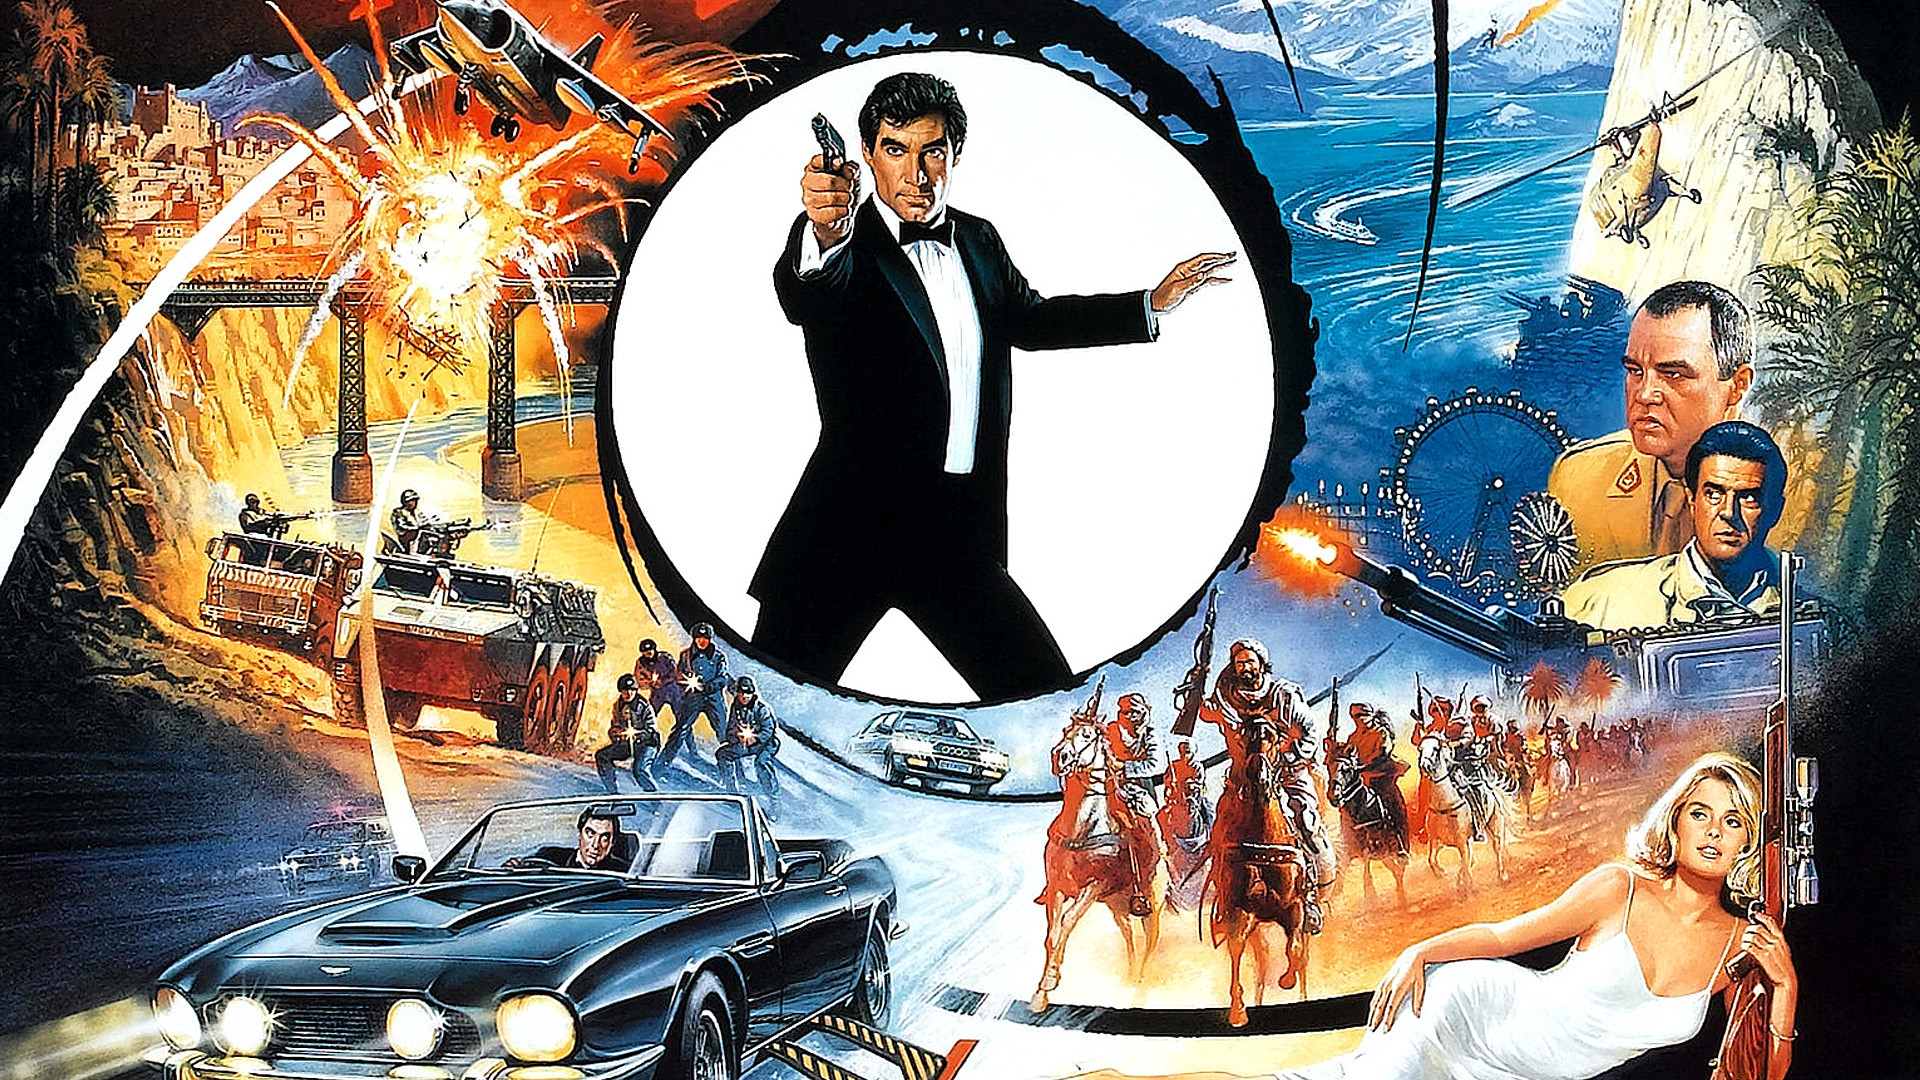 James Bond 007: The Living Daylights: The Computer Game